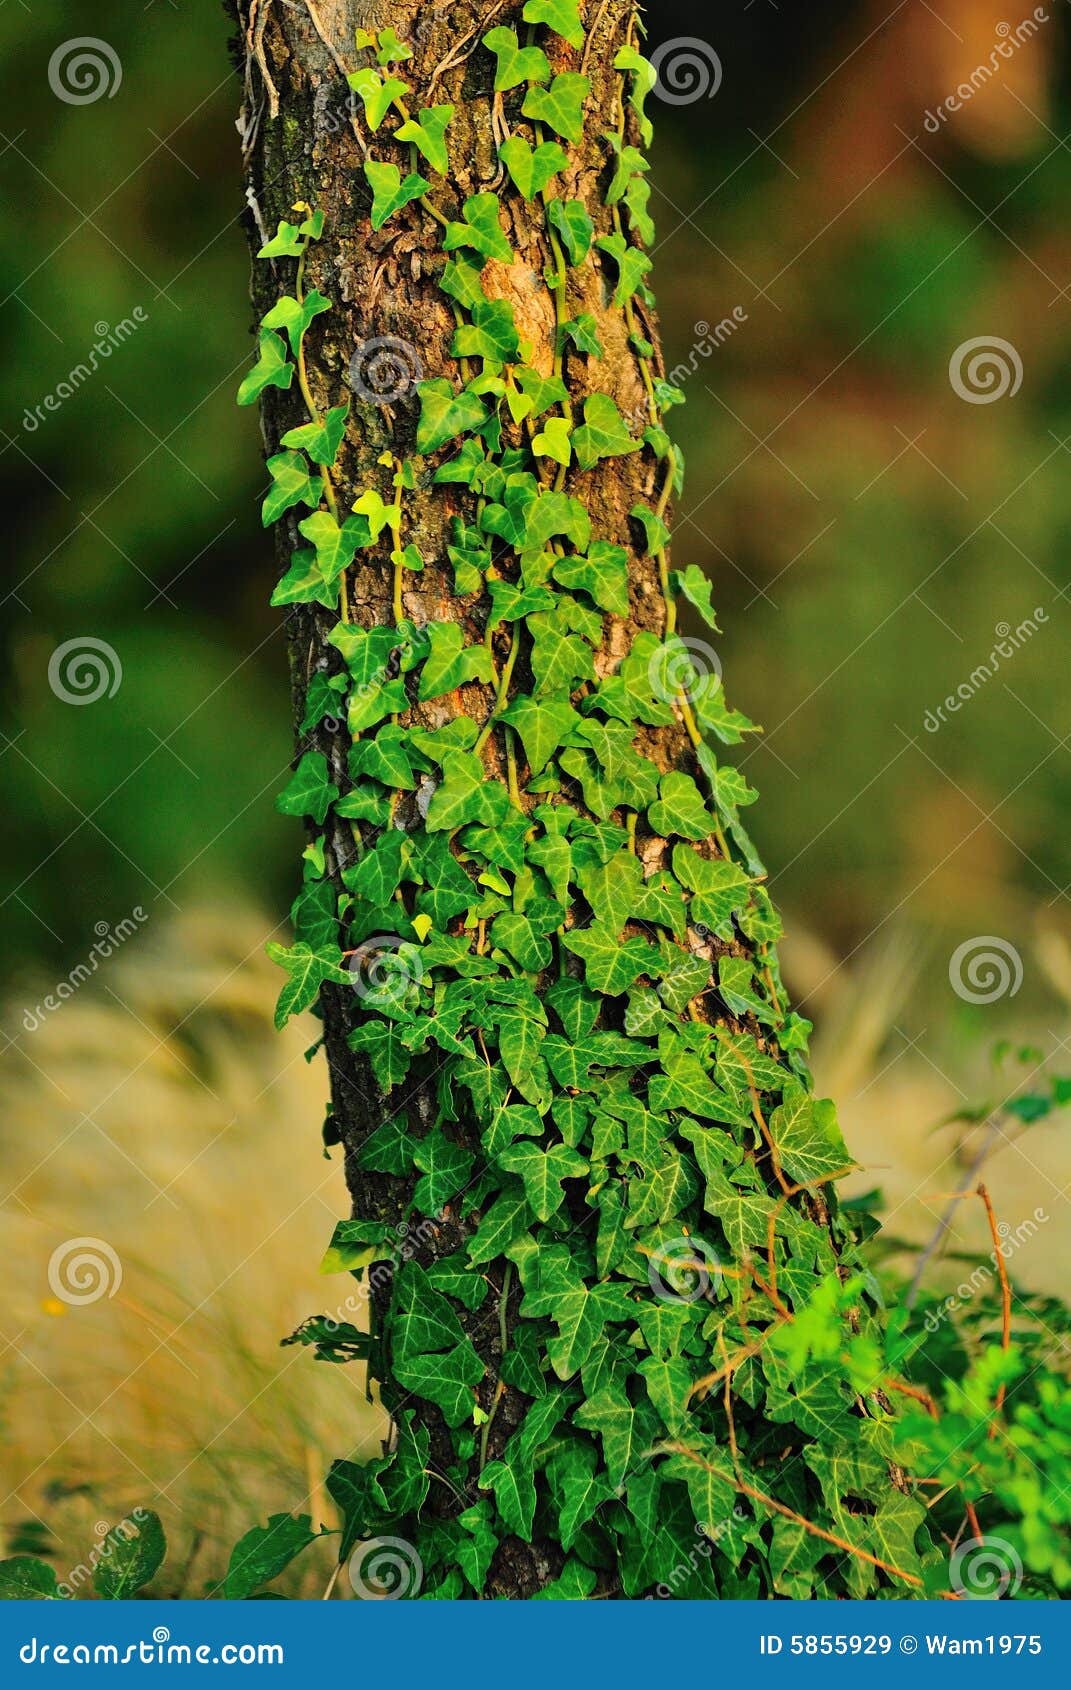 Creeper plant stock image. Image of trunk, green, plant